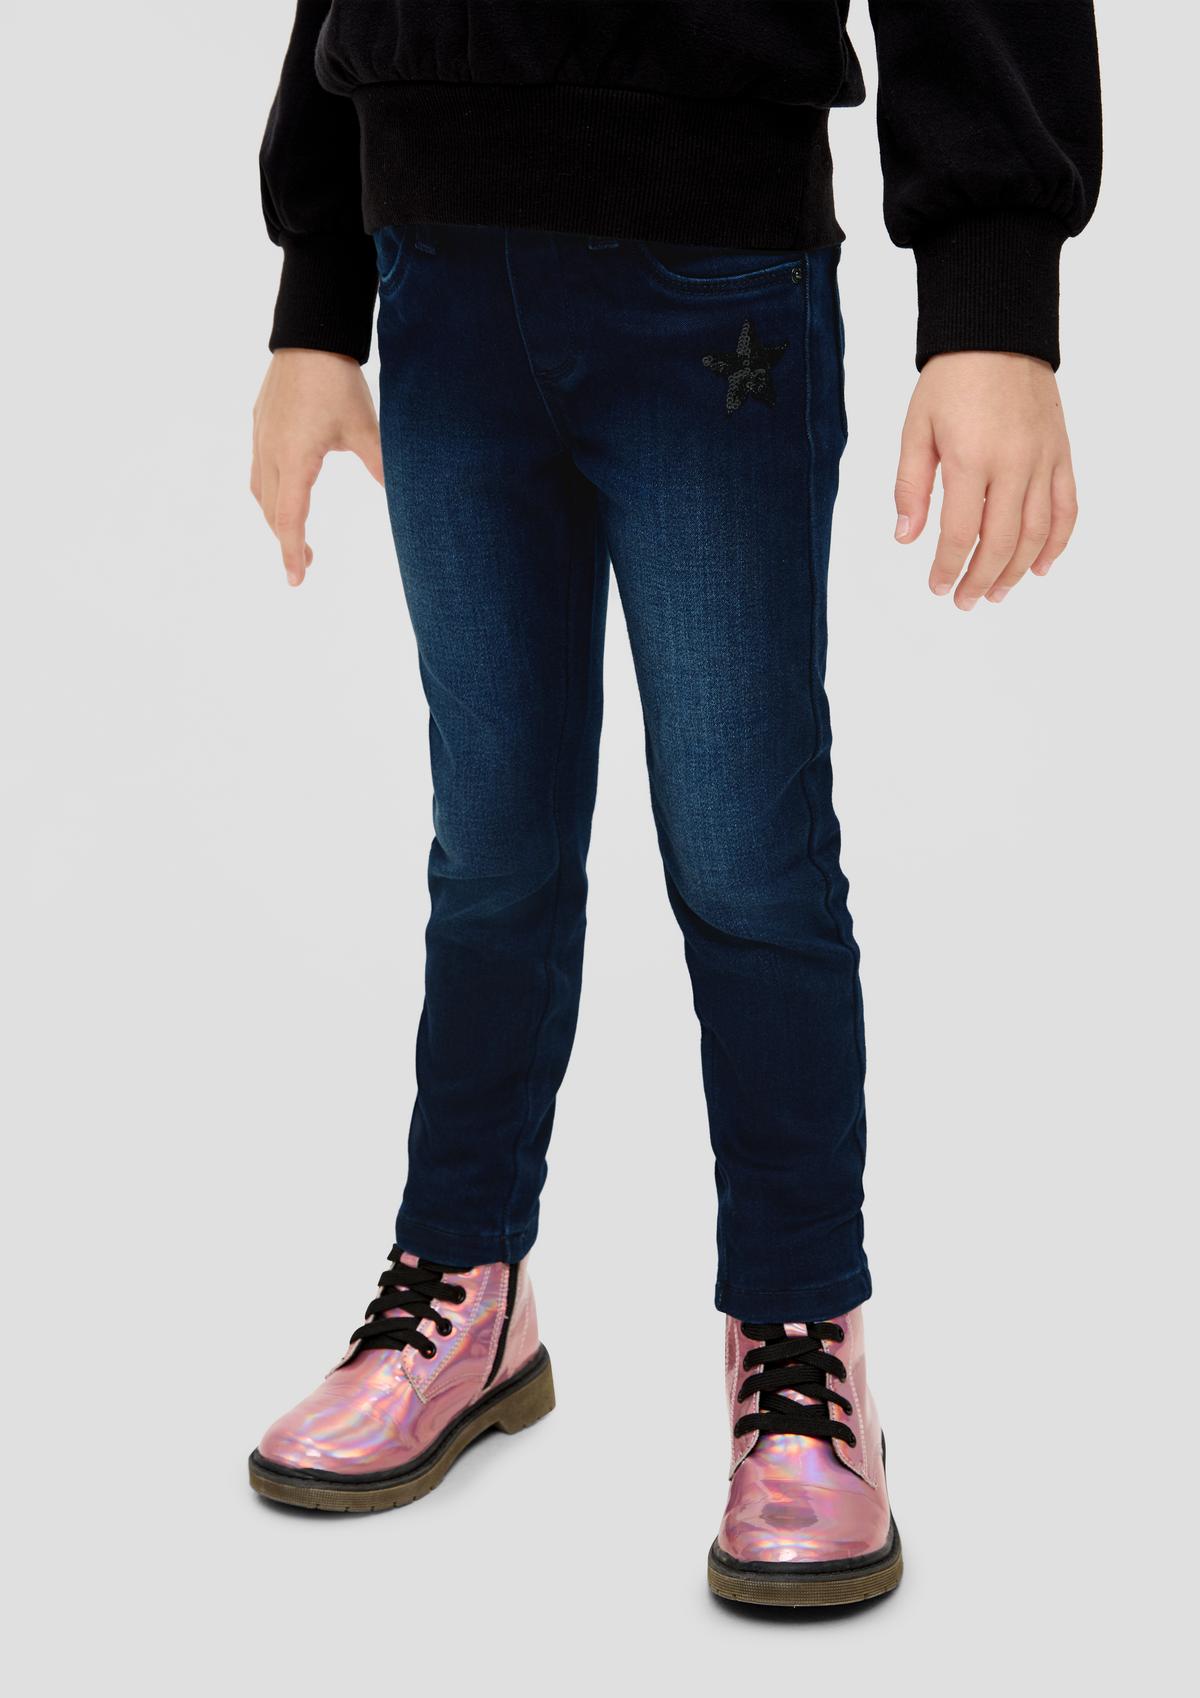 Shop jeans for girls and teens online